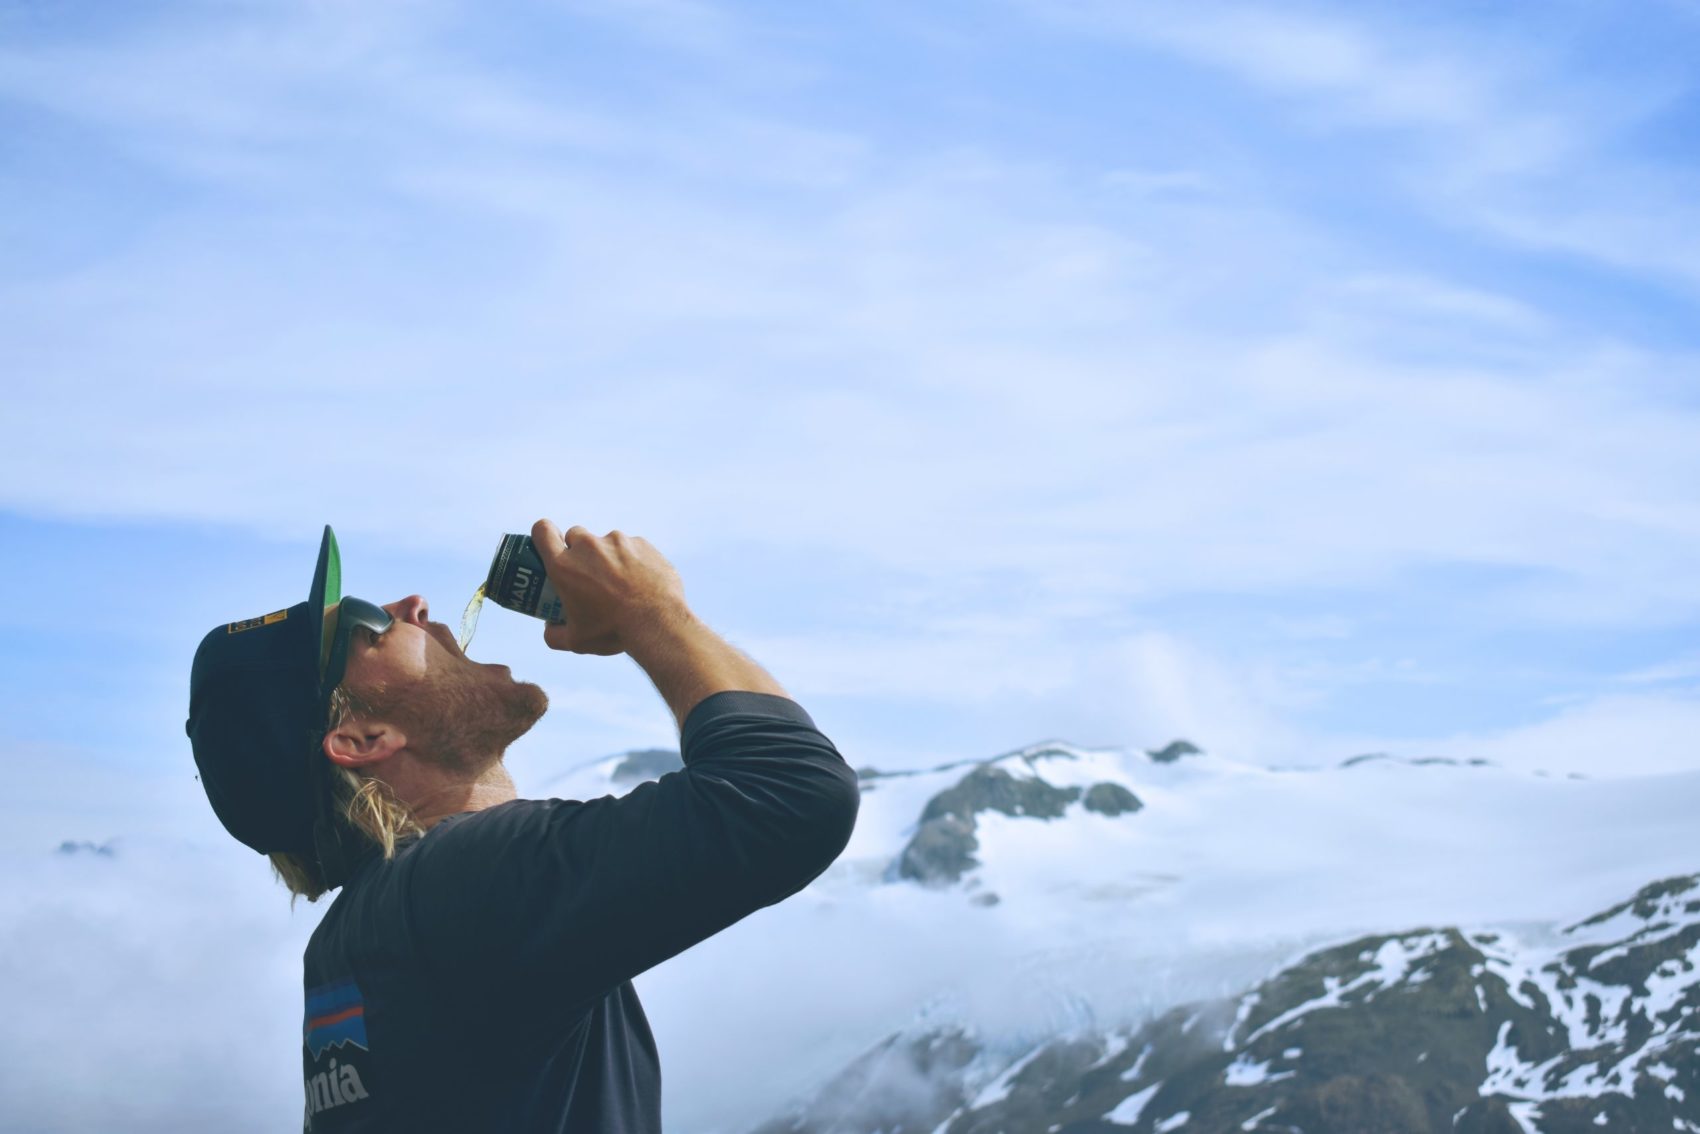 get paid to drink beer and hike